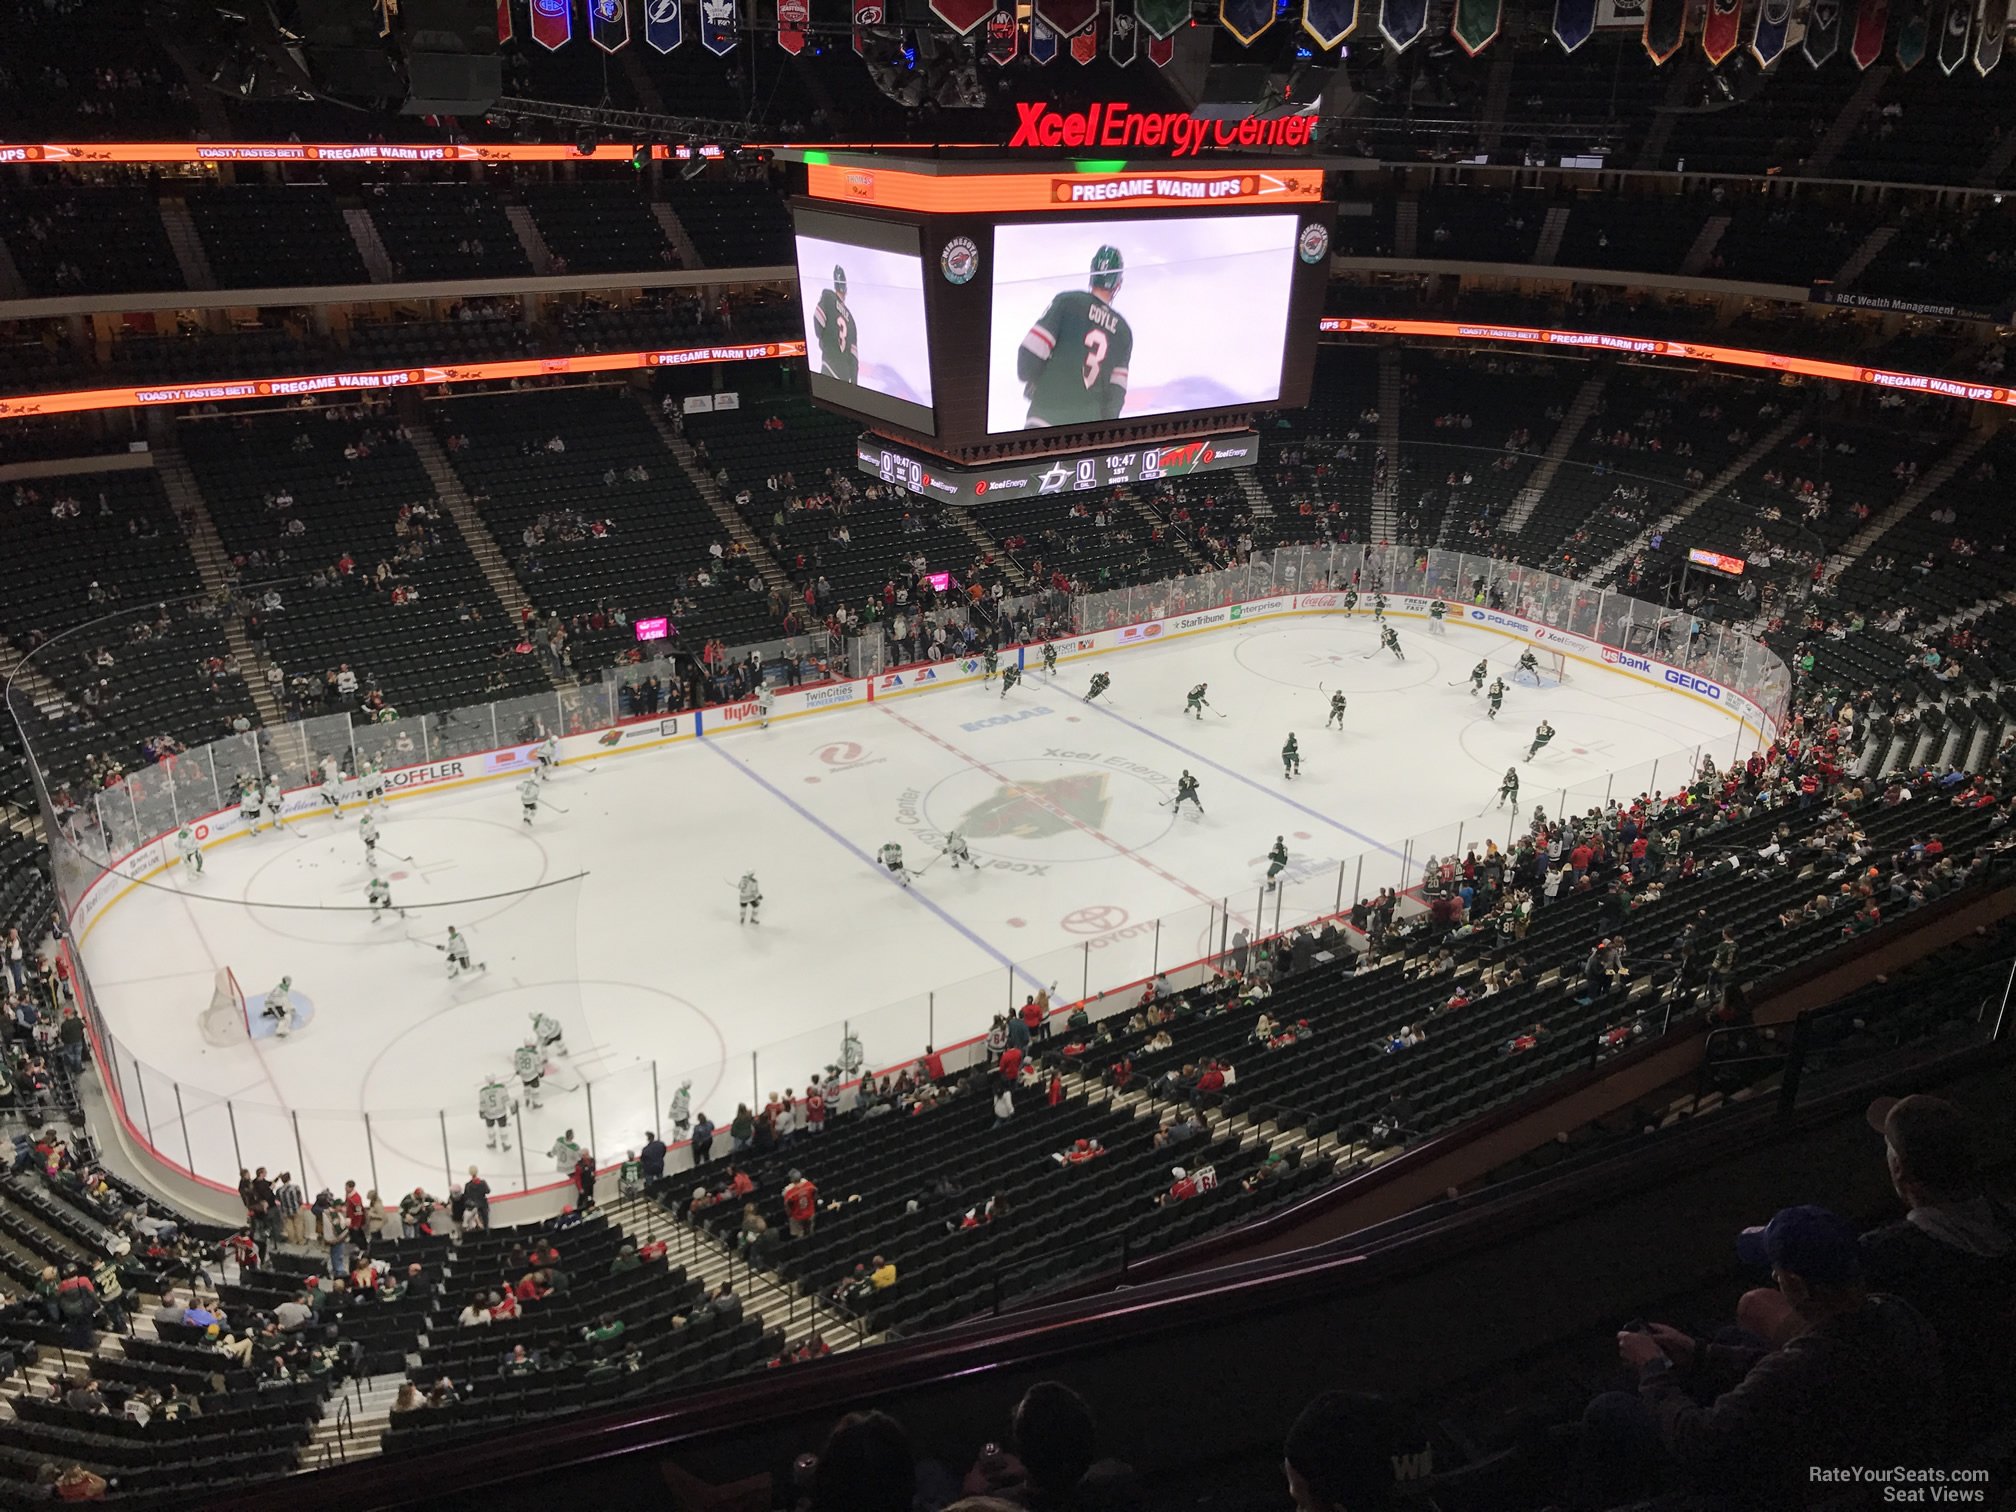 section 207, row 6 seat view  for hockey - xcel energy center